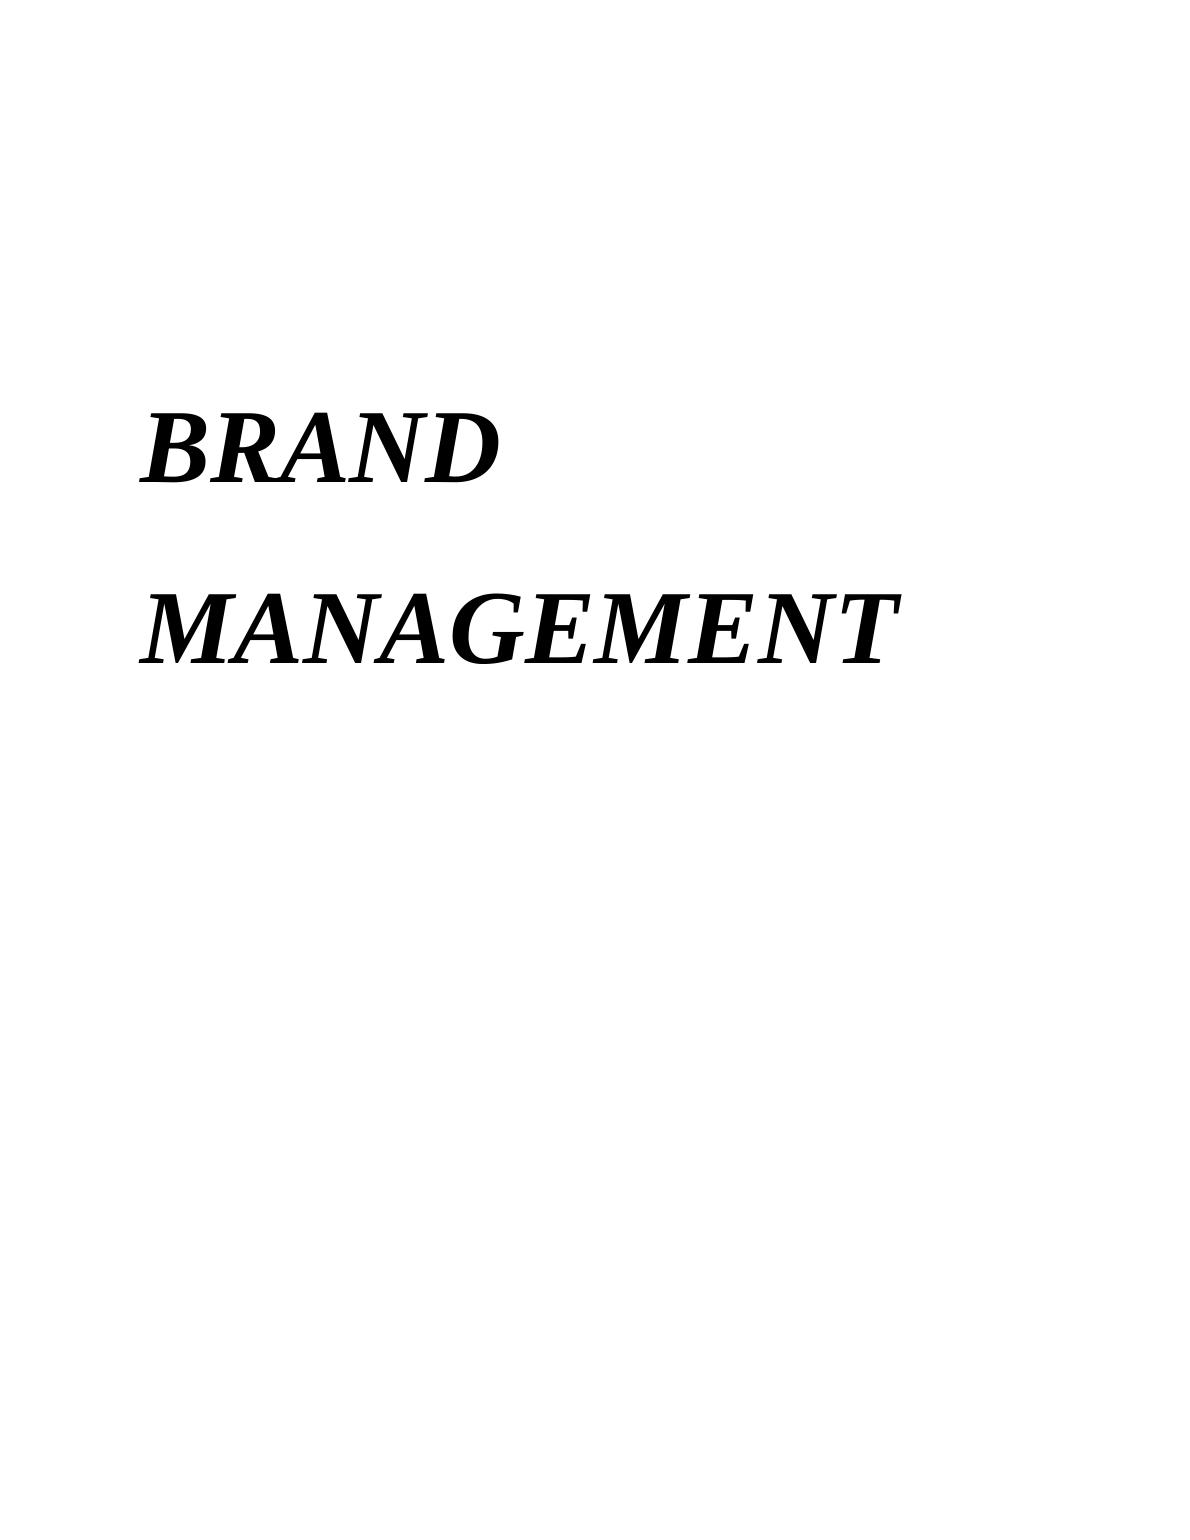 Assignment on Brand Management Project_1